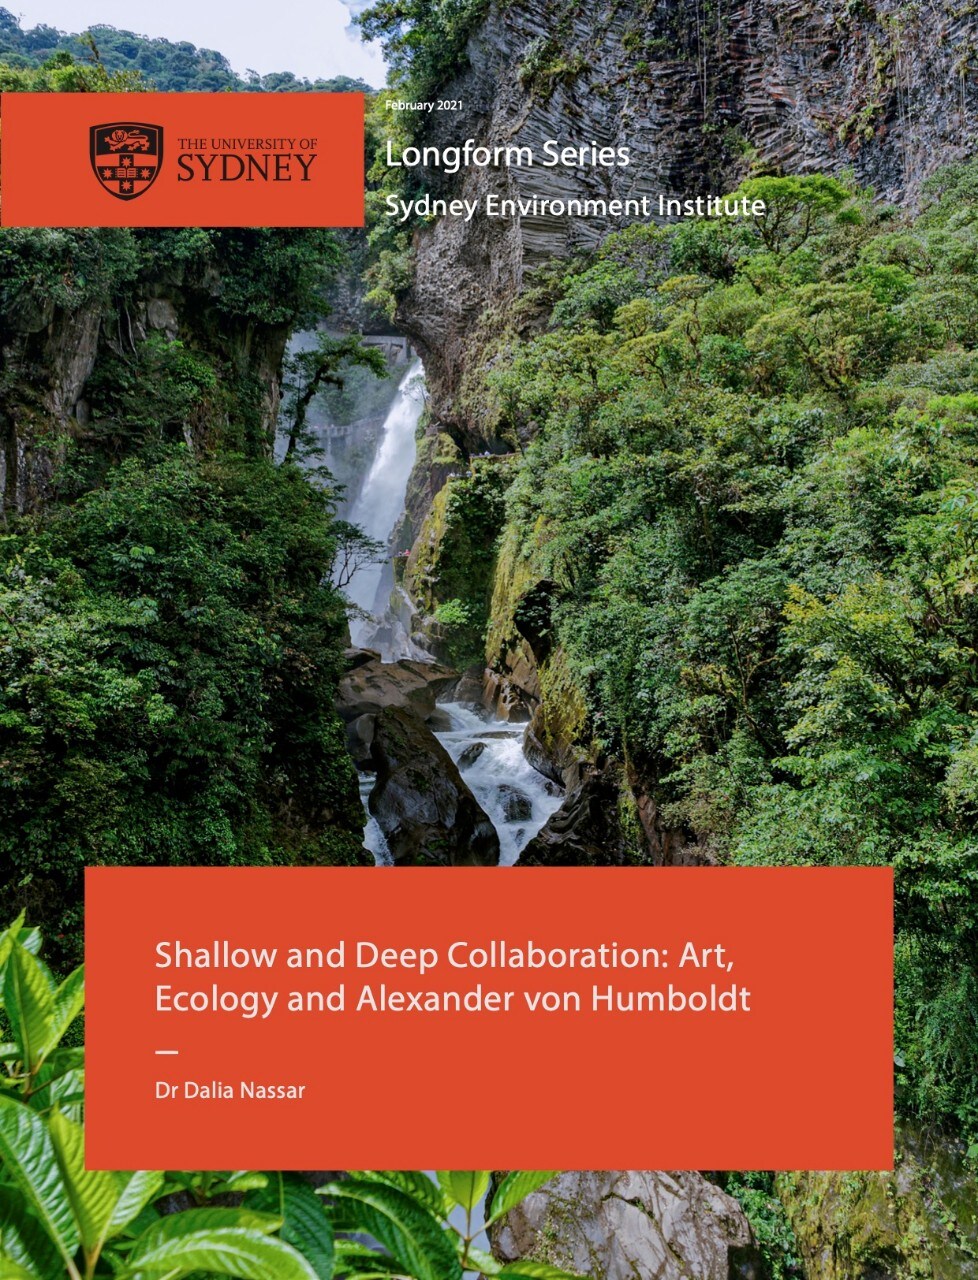 Cover of longform essay featuring wtaerfall in rainforest